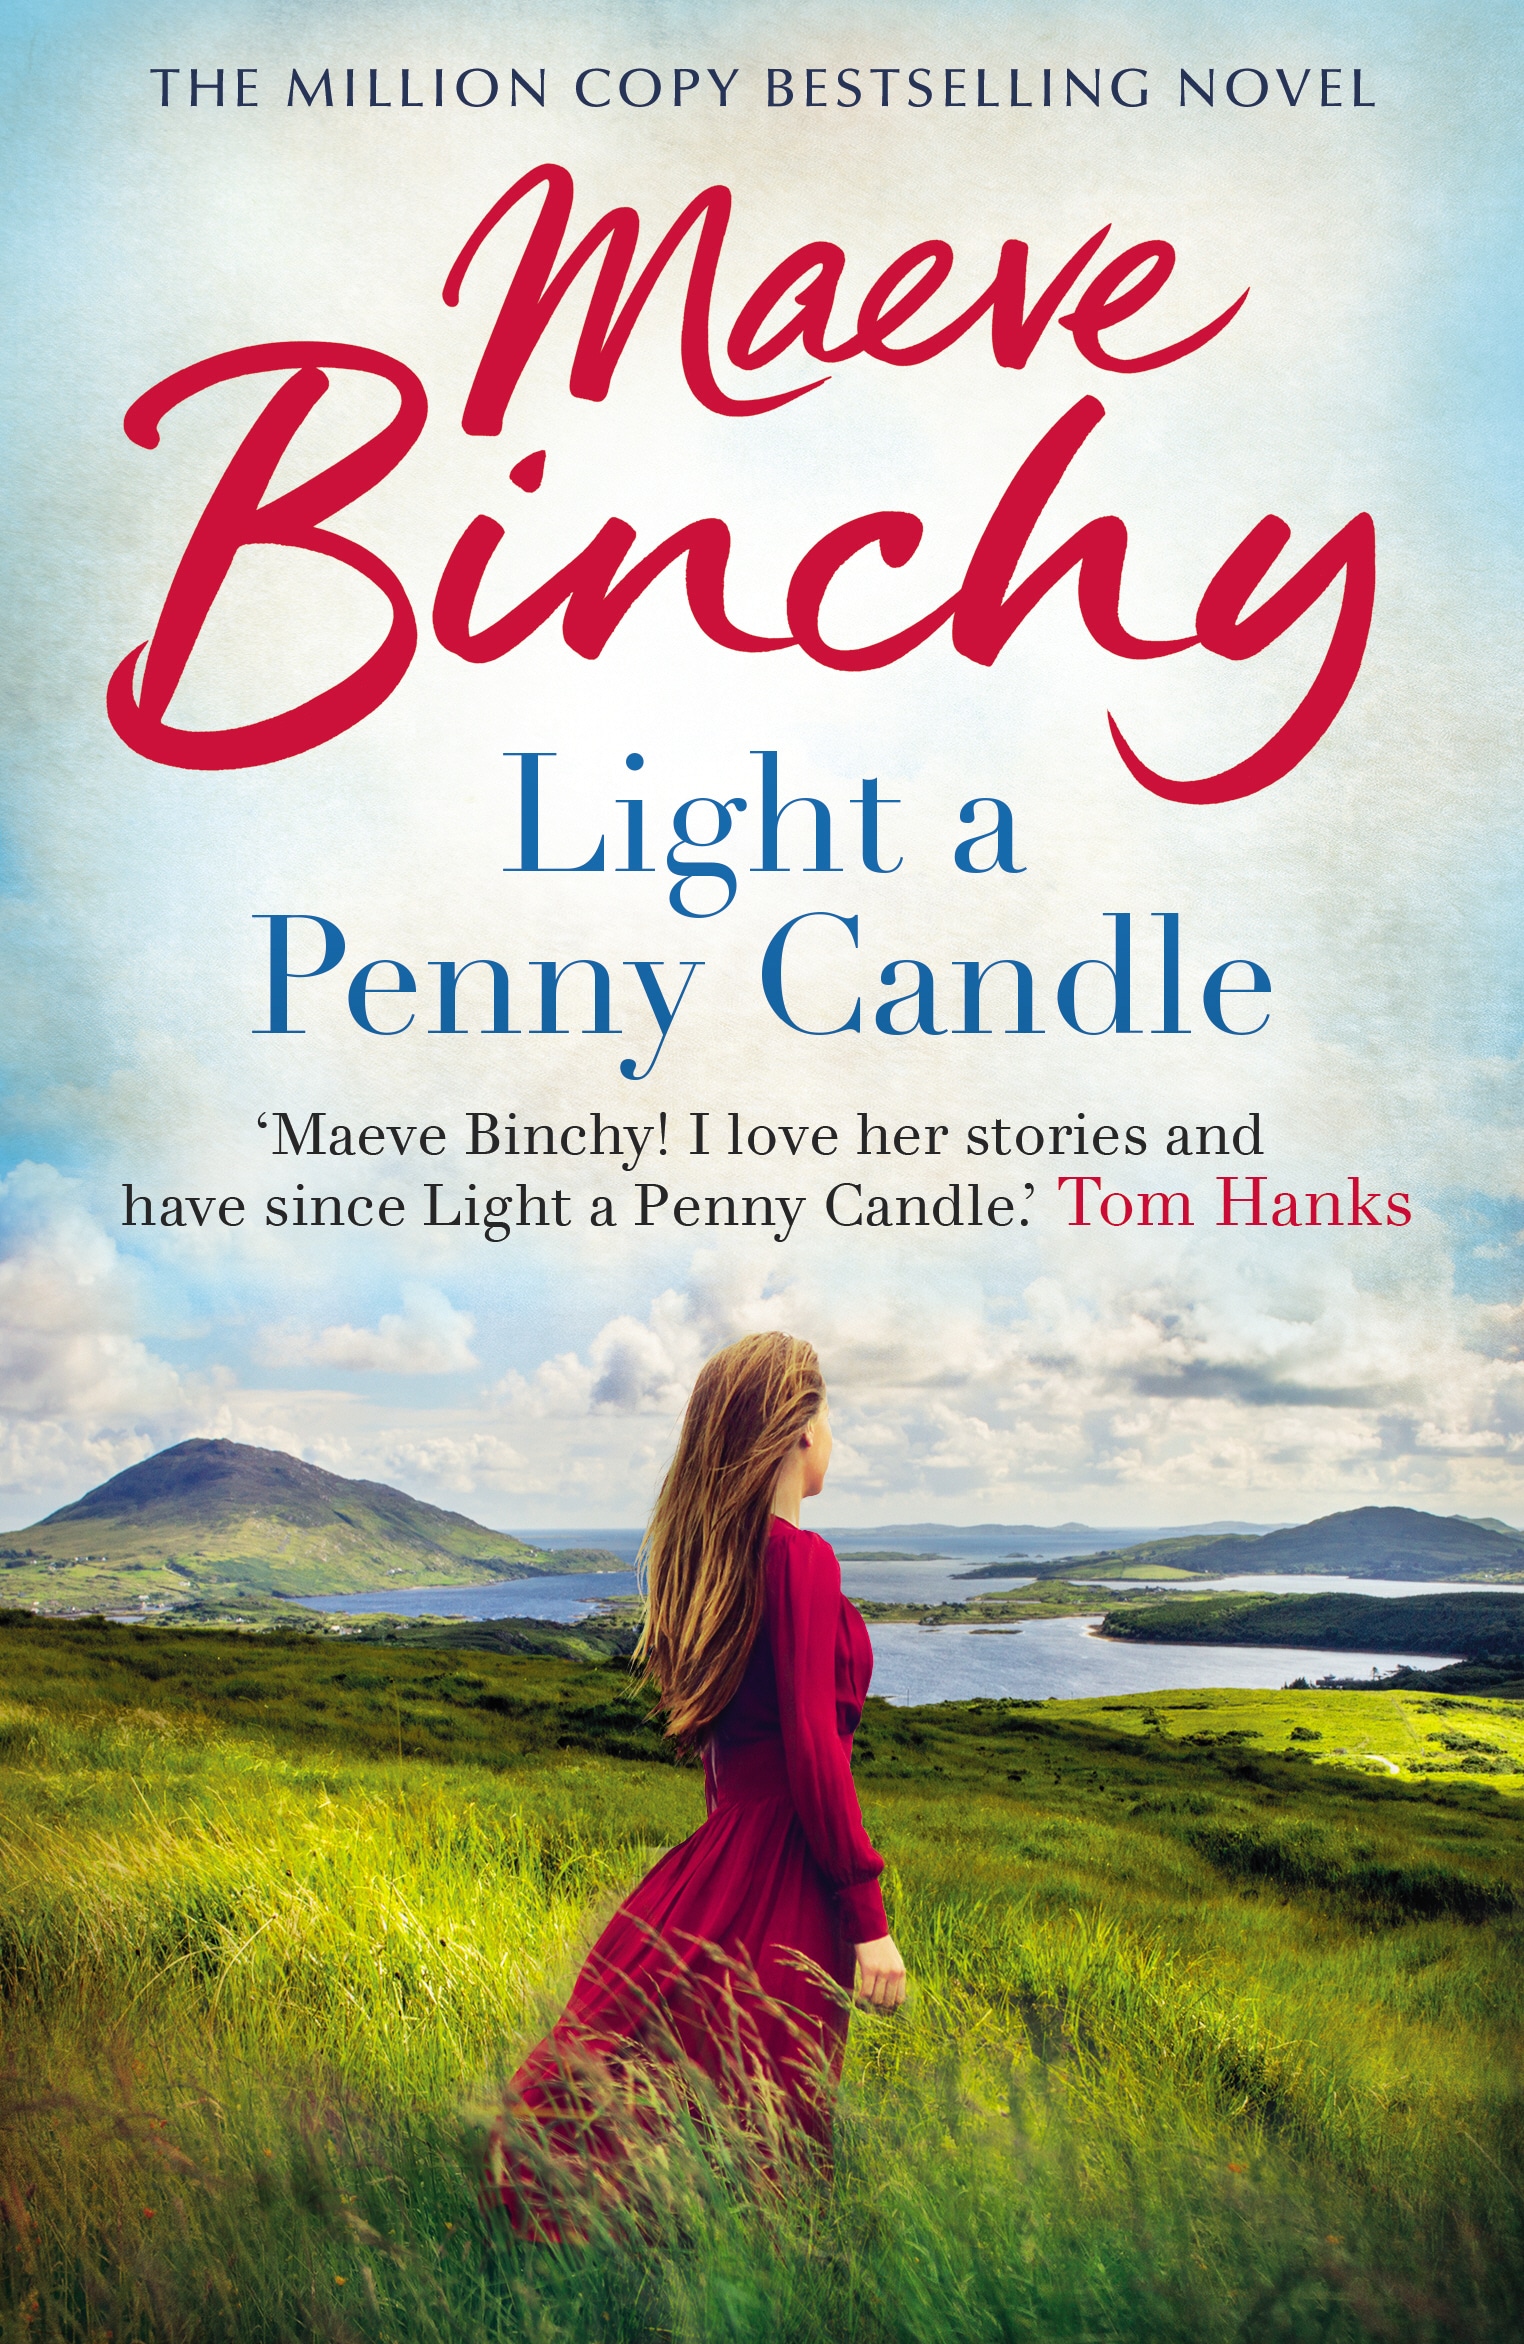 Book “Light A Penny Candle” by Maeve Binchy — February 7, 2019